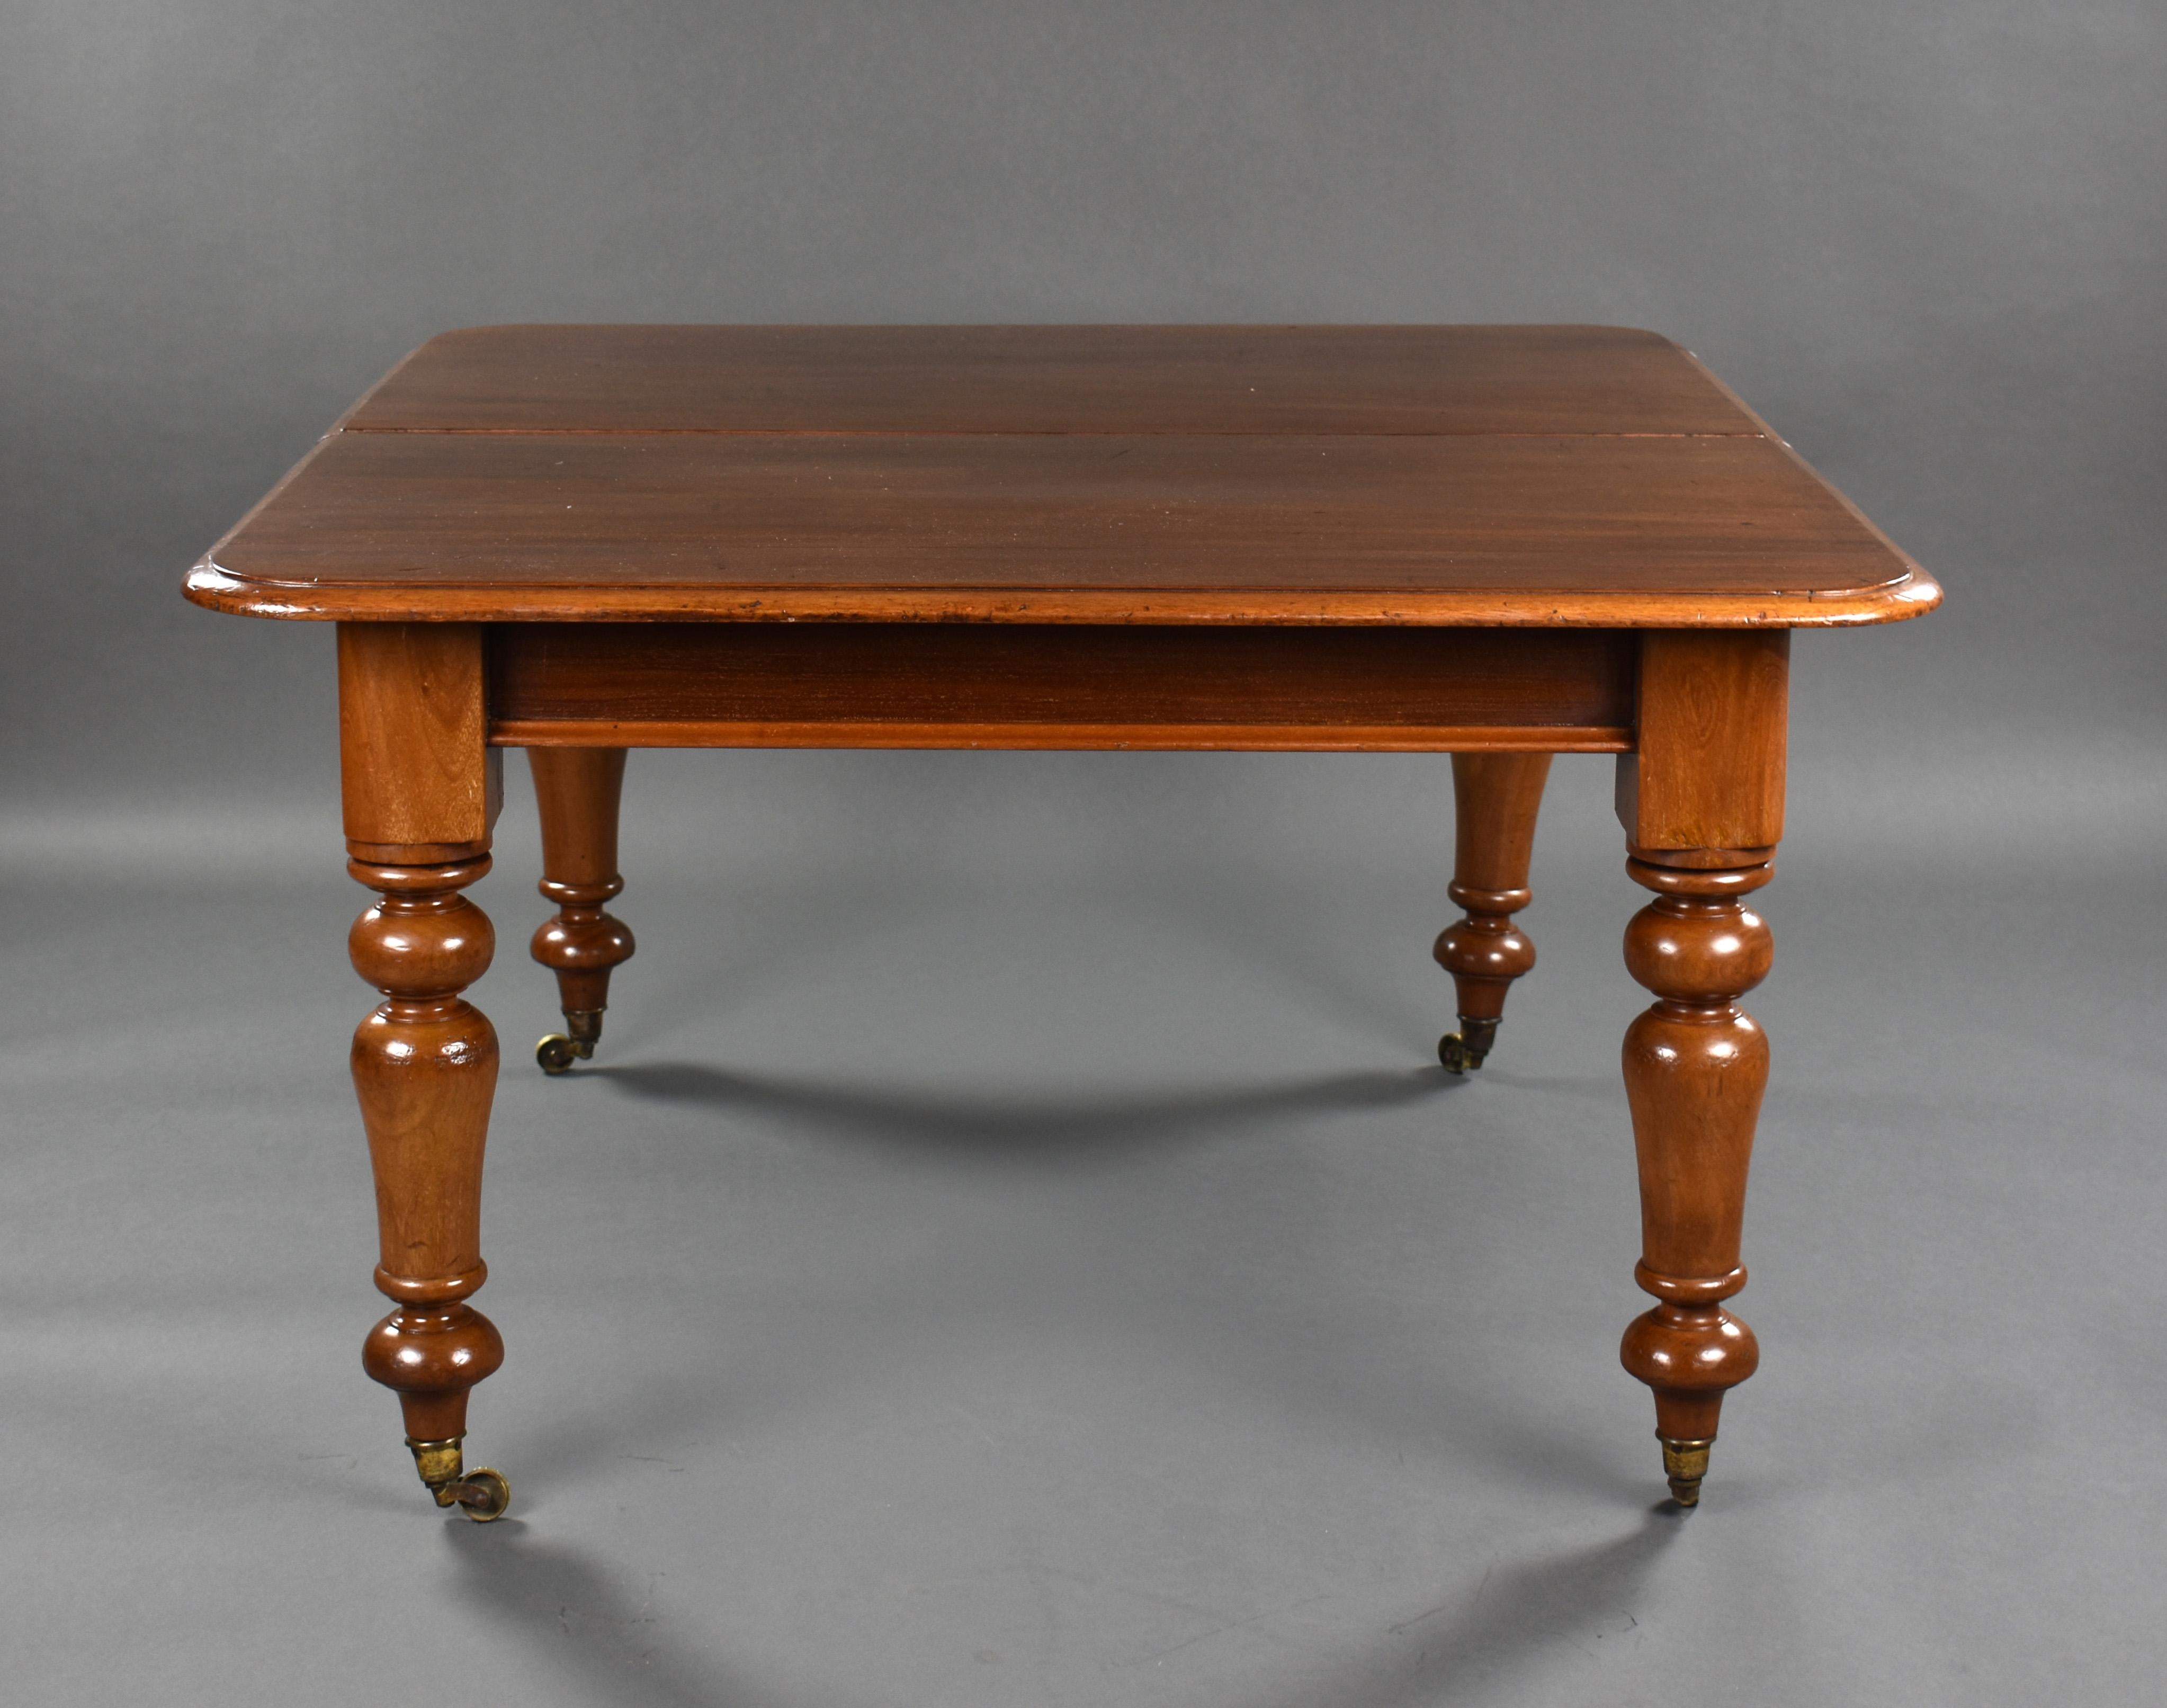 For sale is a good quality Victorian mahogany dining table, having two additional leaves, standing on elegant turned legs raised on castors. The table remains in very good condition for its age. 

Measures: Length (extended): 230cm Depth: 122cm